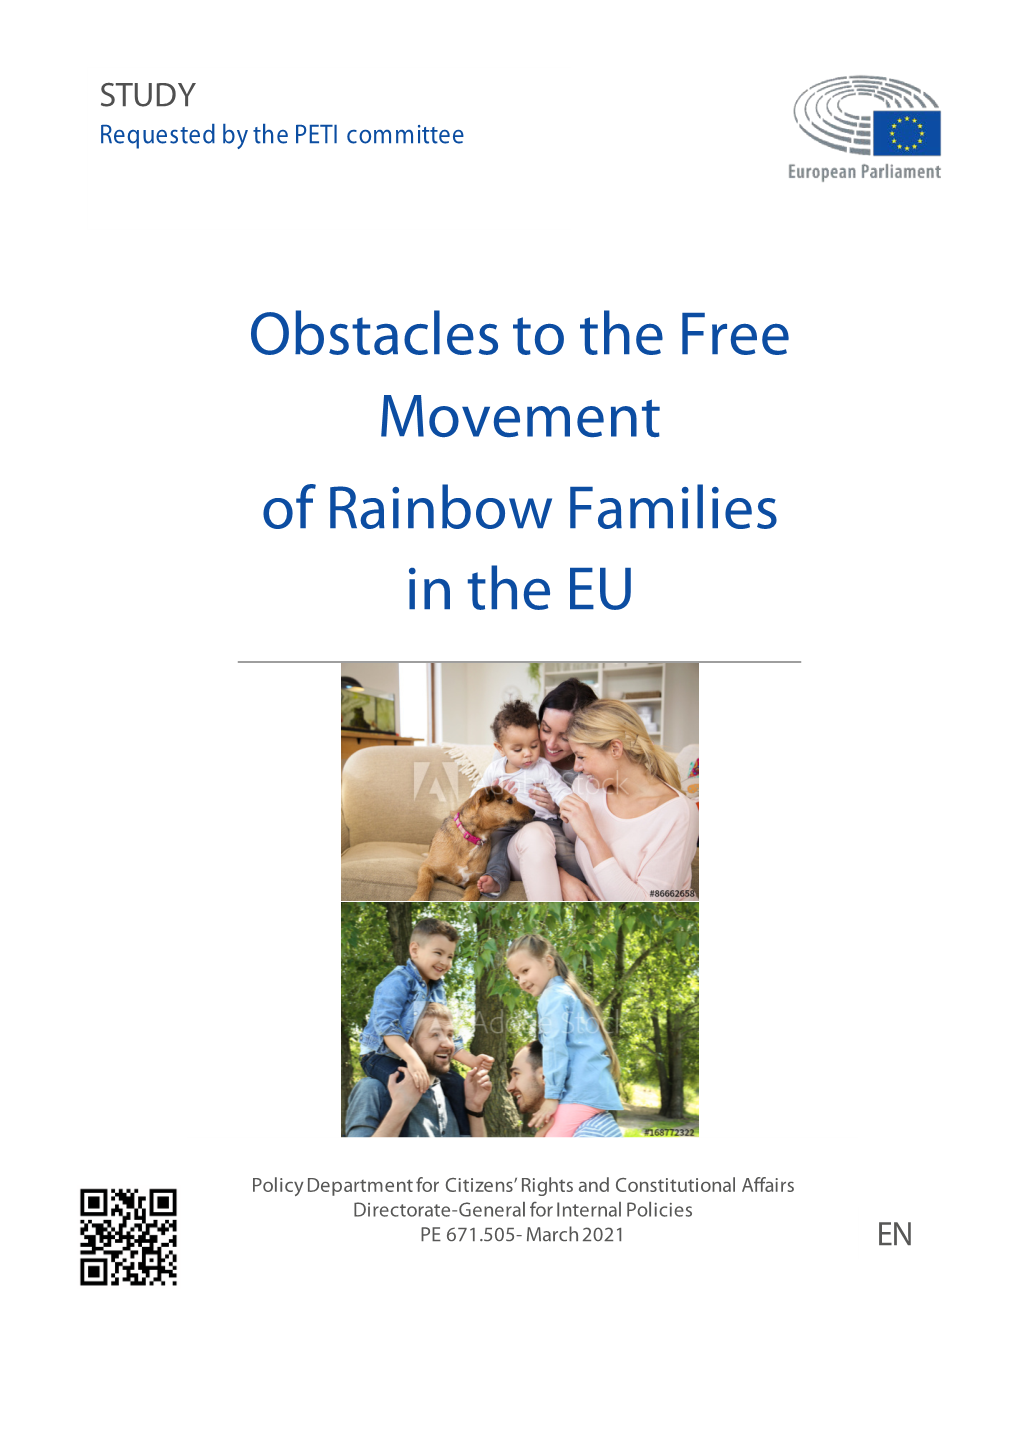 Obstacles to the Free Movement of Rainbow Families in the EU